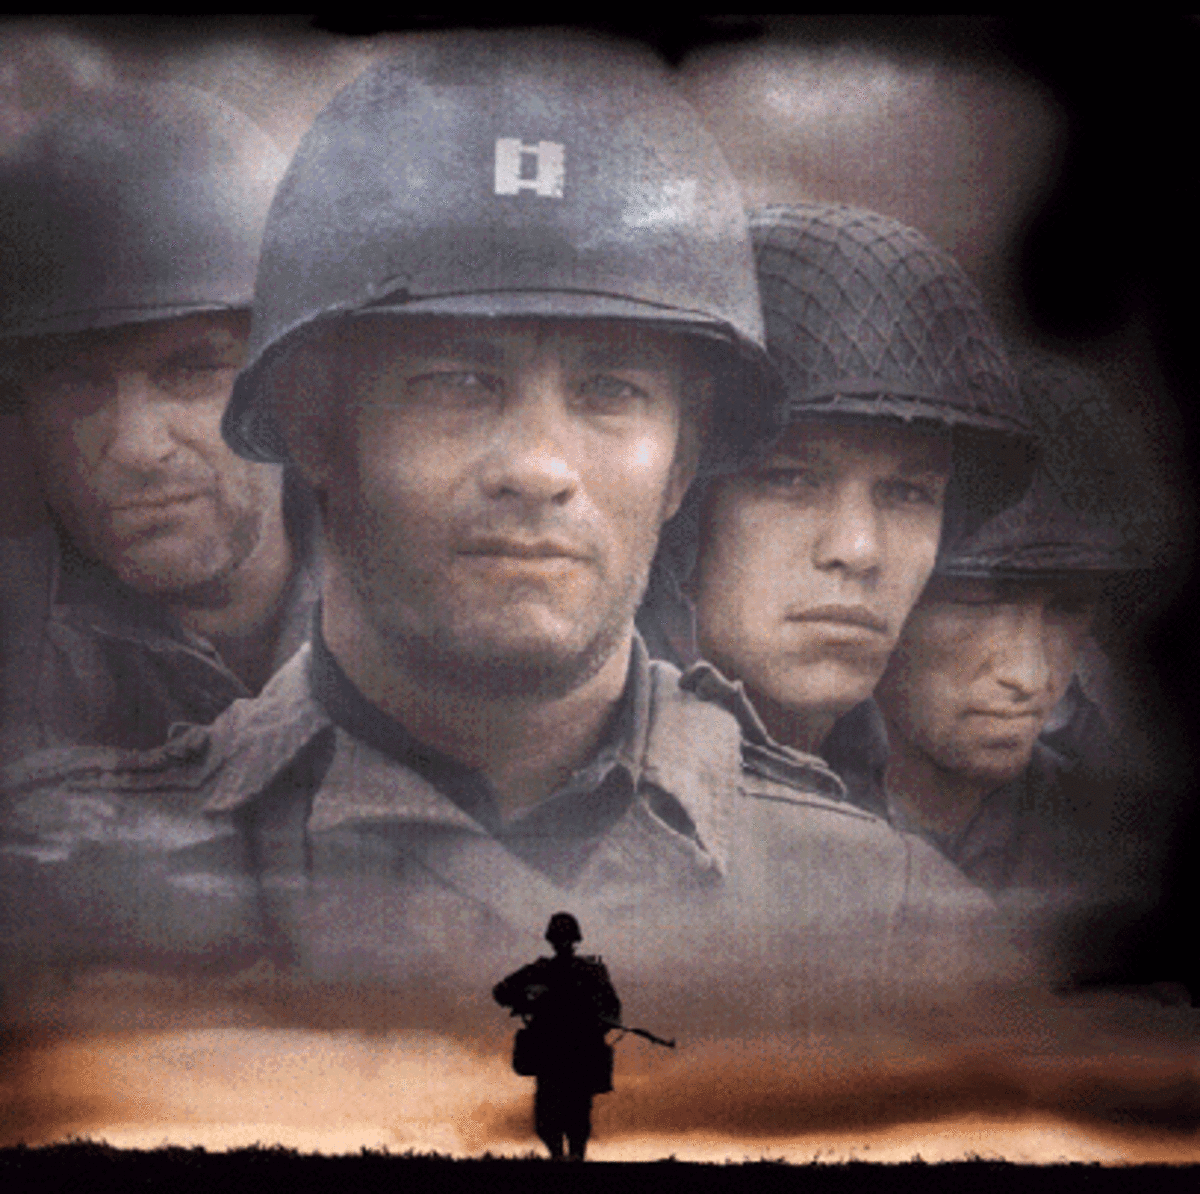 Possibly the greatest war film ever made.